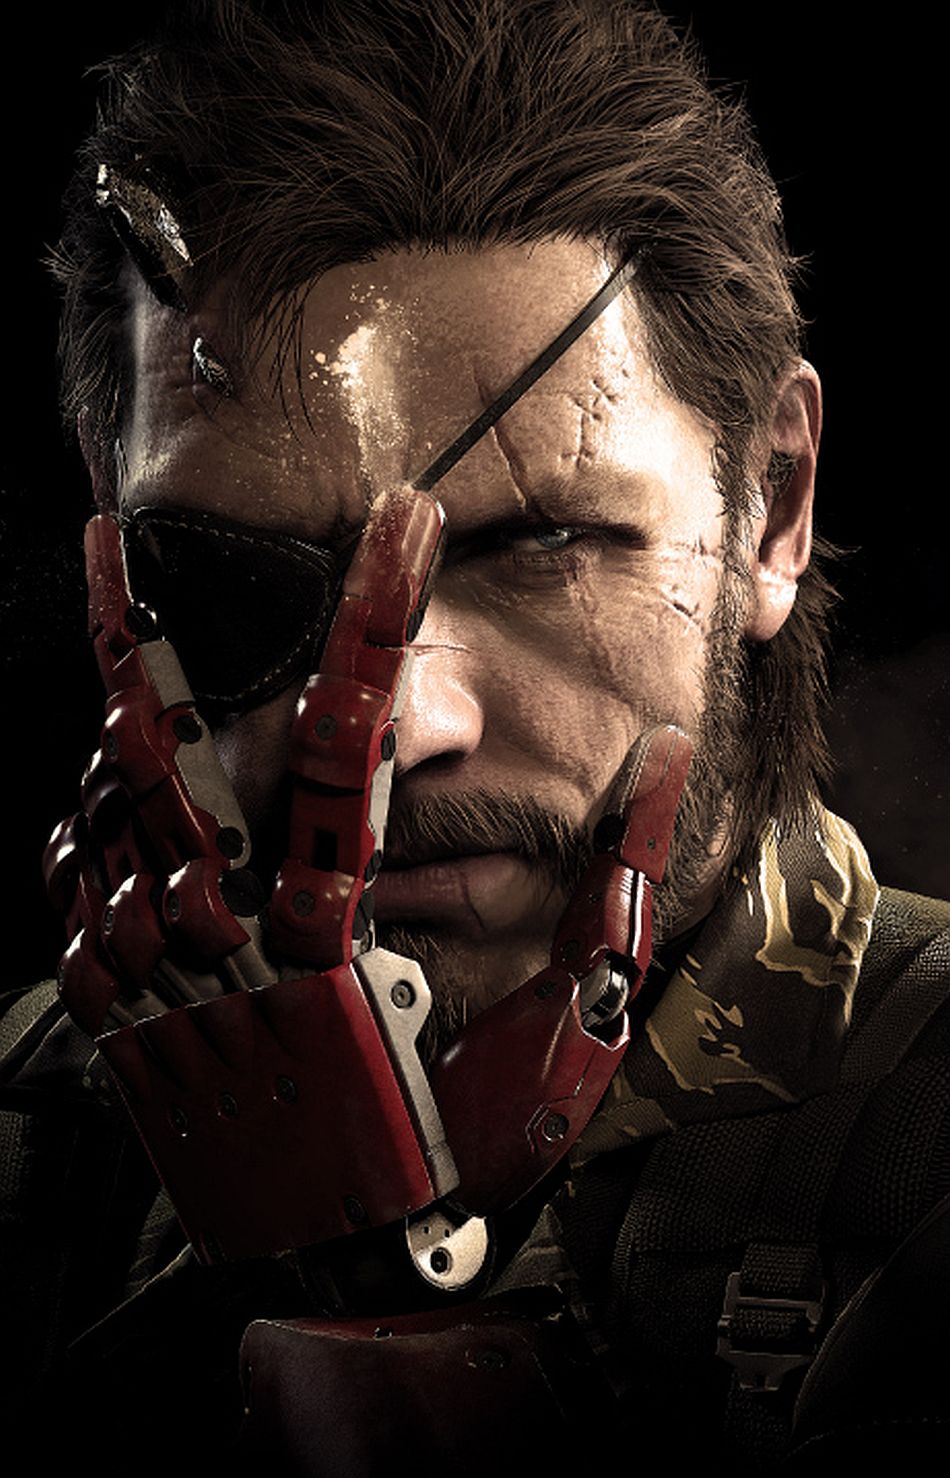 Image for This video shows the contents of Metal Gear Solid 5: The Phantom Pain - Day 1 Edition